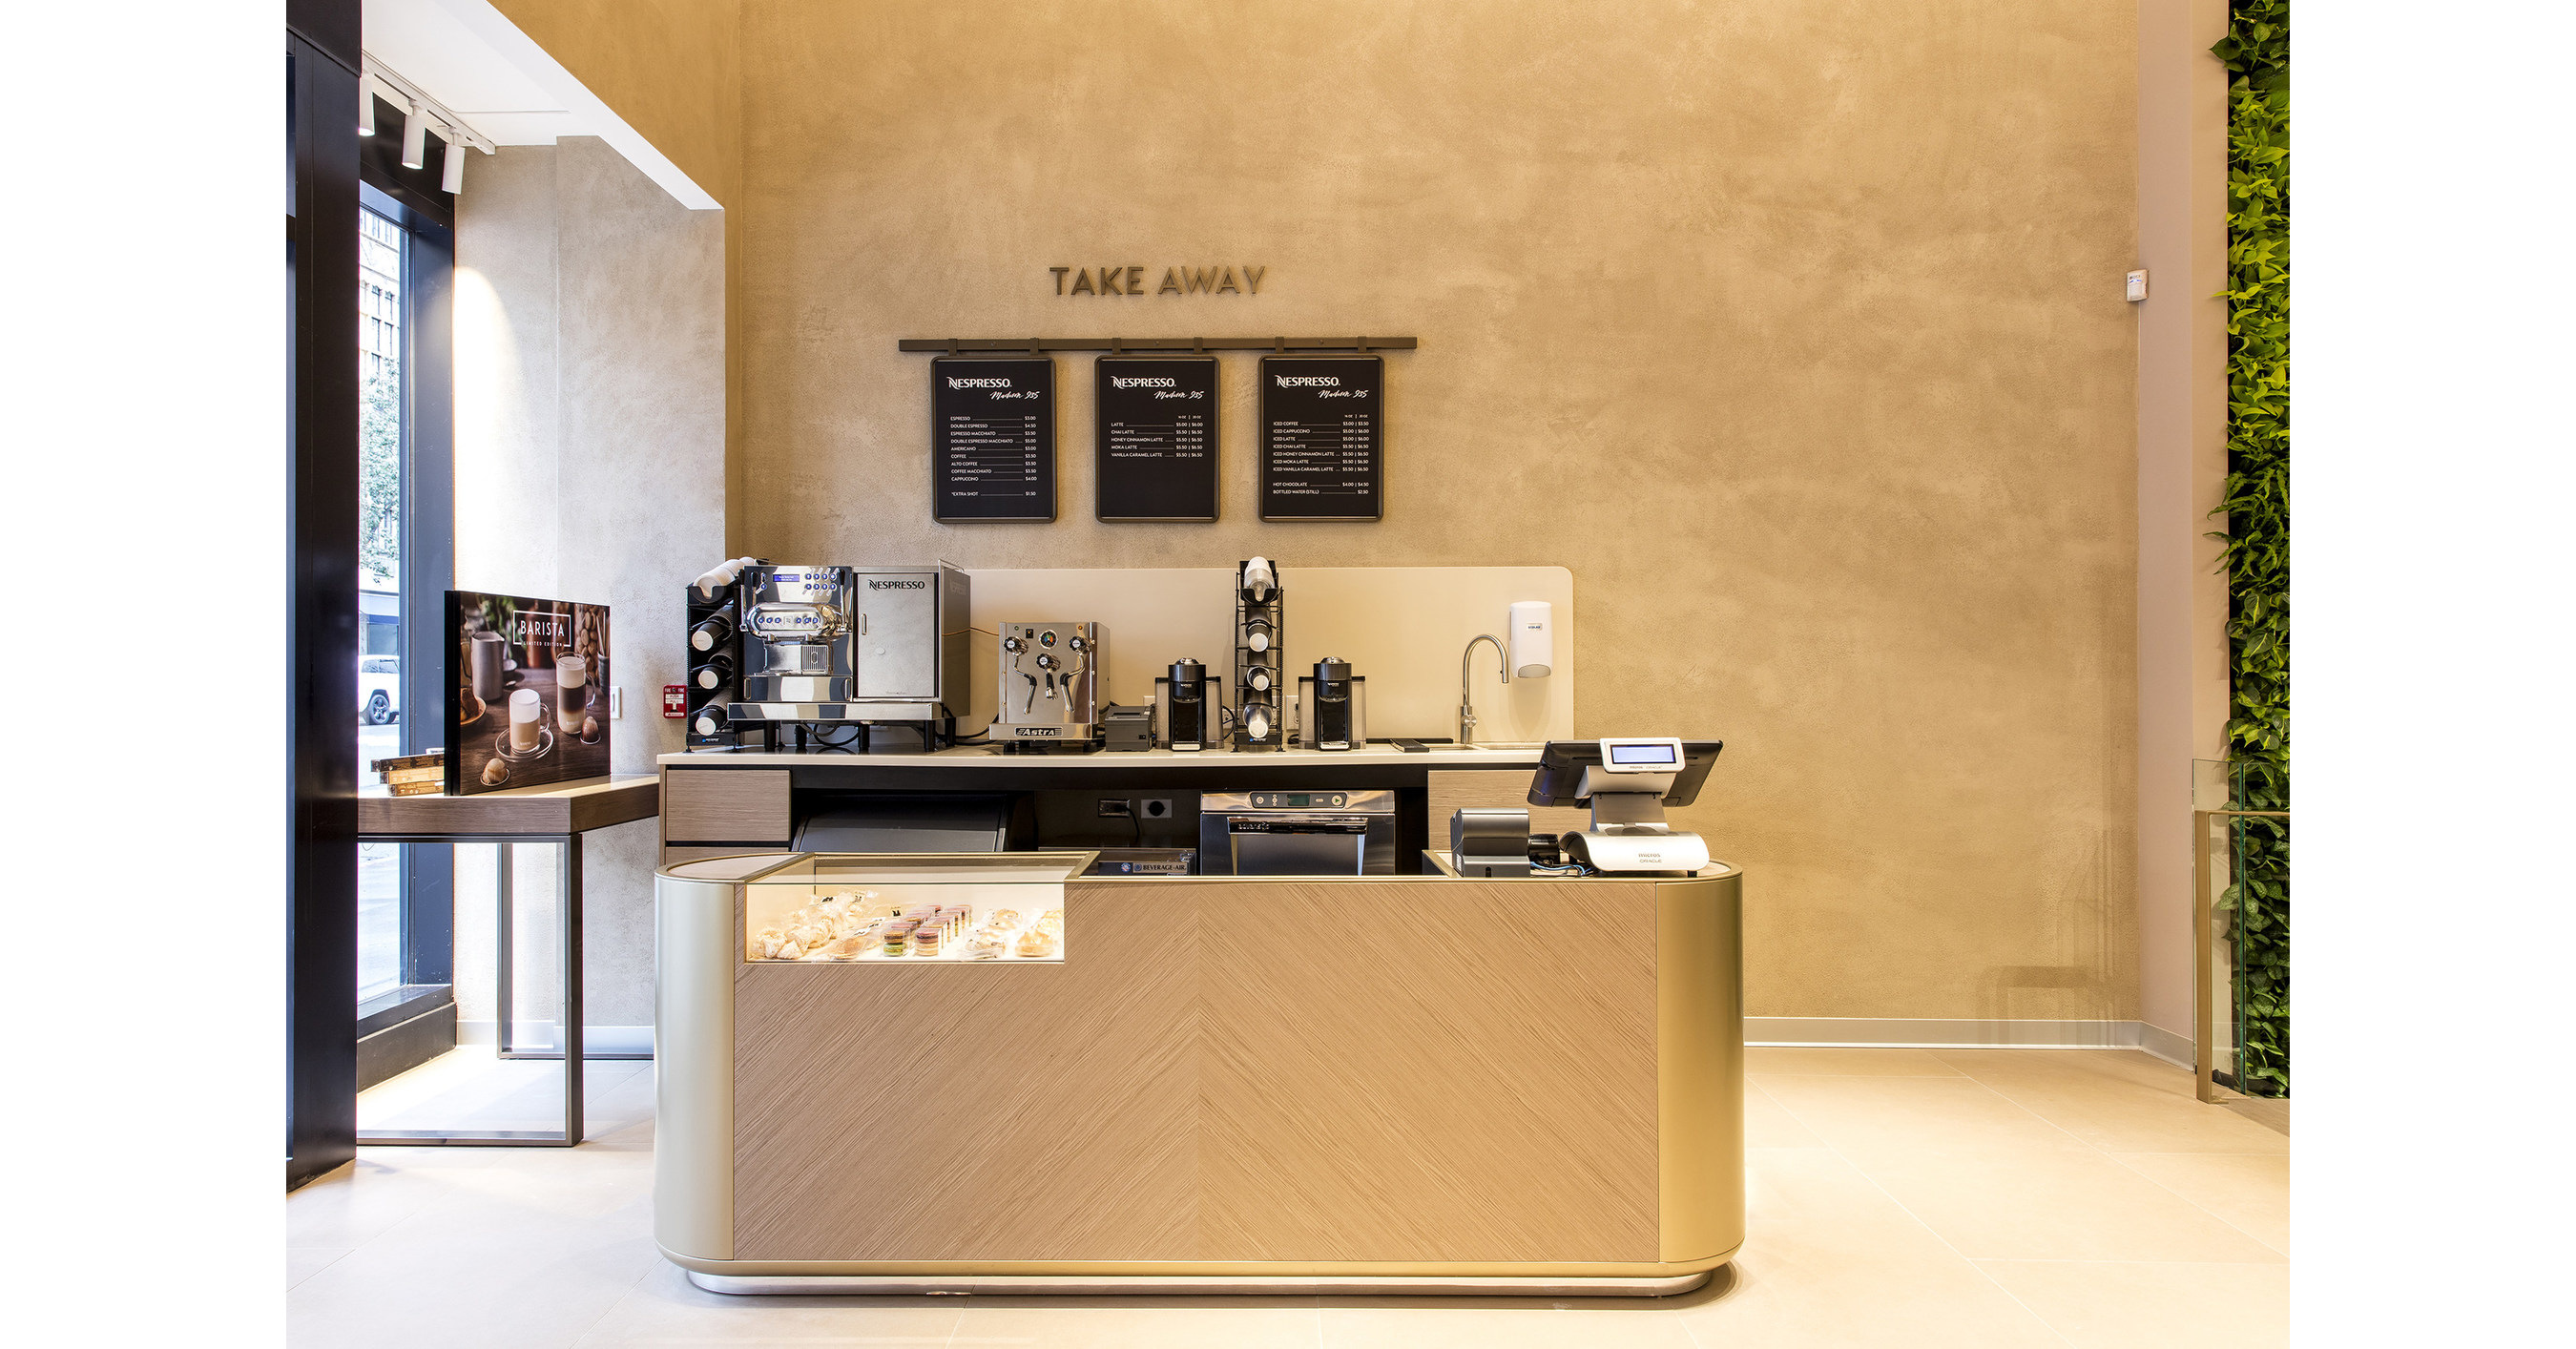 Nespresso Premieres New Boutique In The U.S. To Visitors In The Ultimate Coffee Experience And Commitment To Sustainability